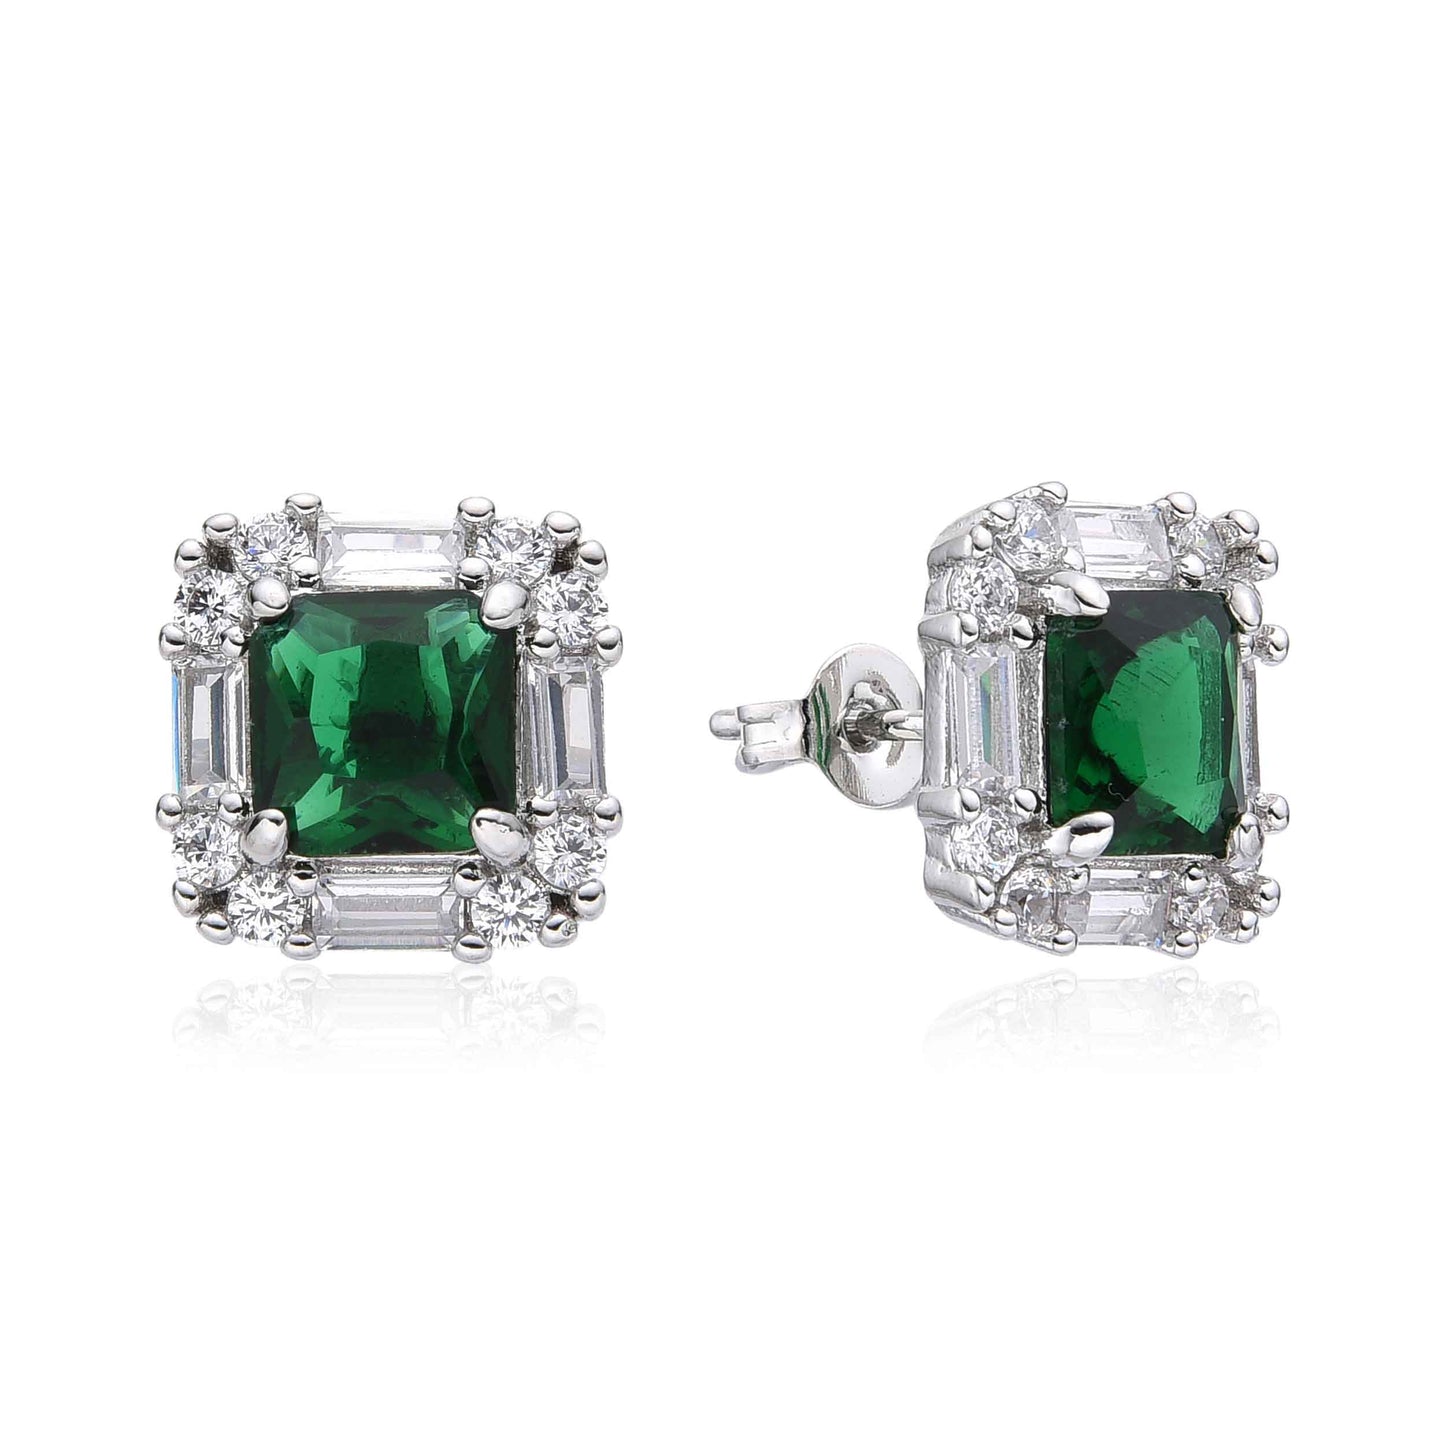 Square Emerald Green & Clear Crystal Stud Earrings